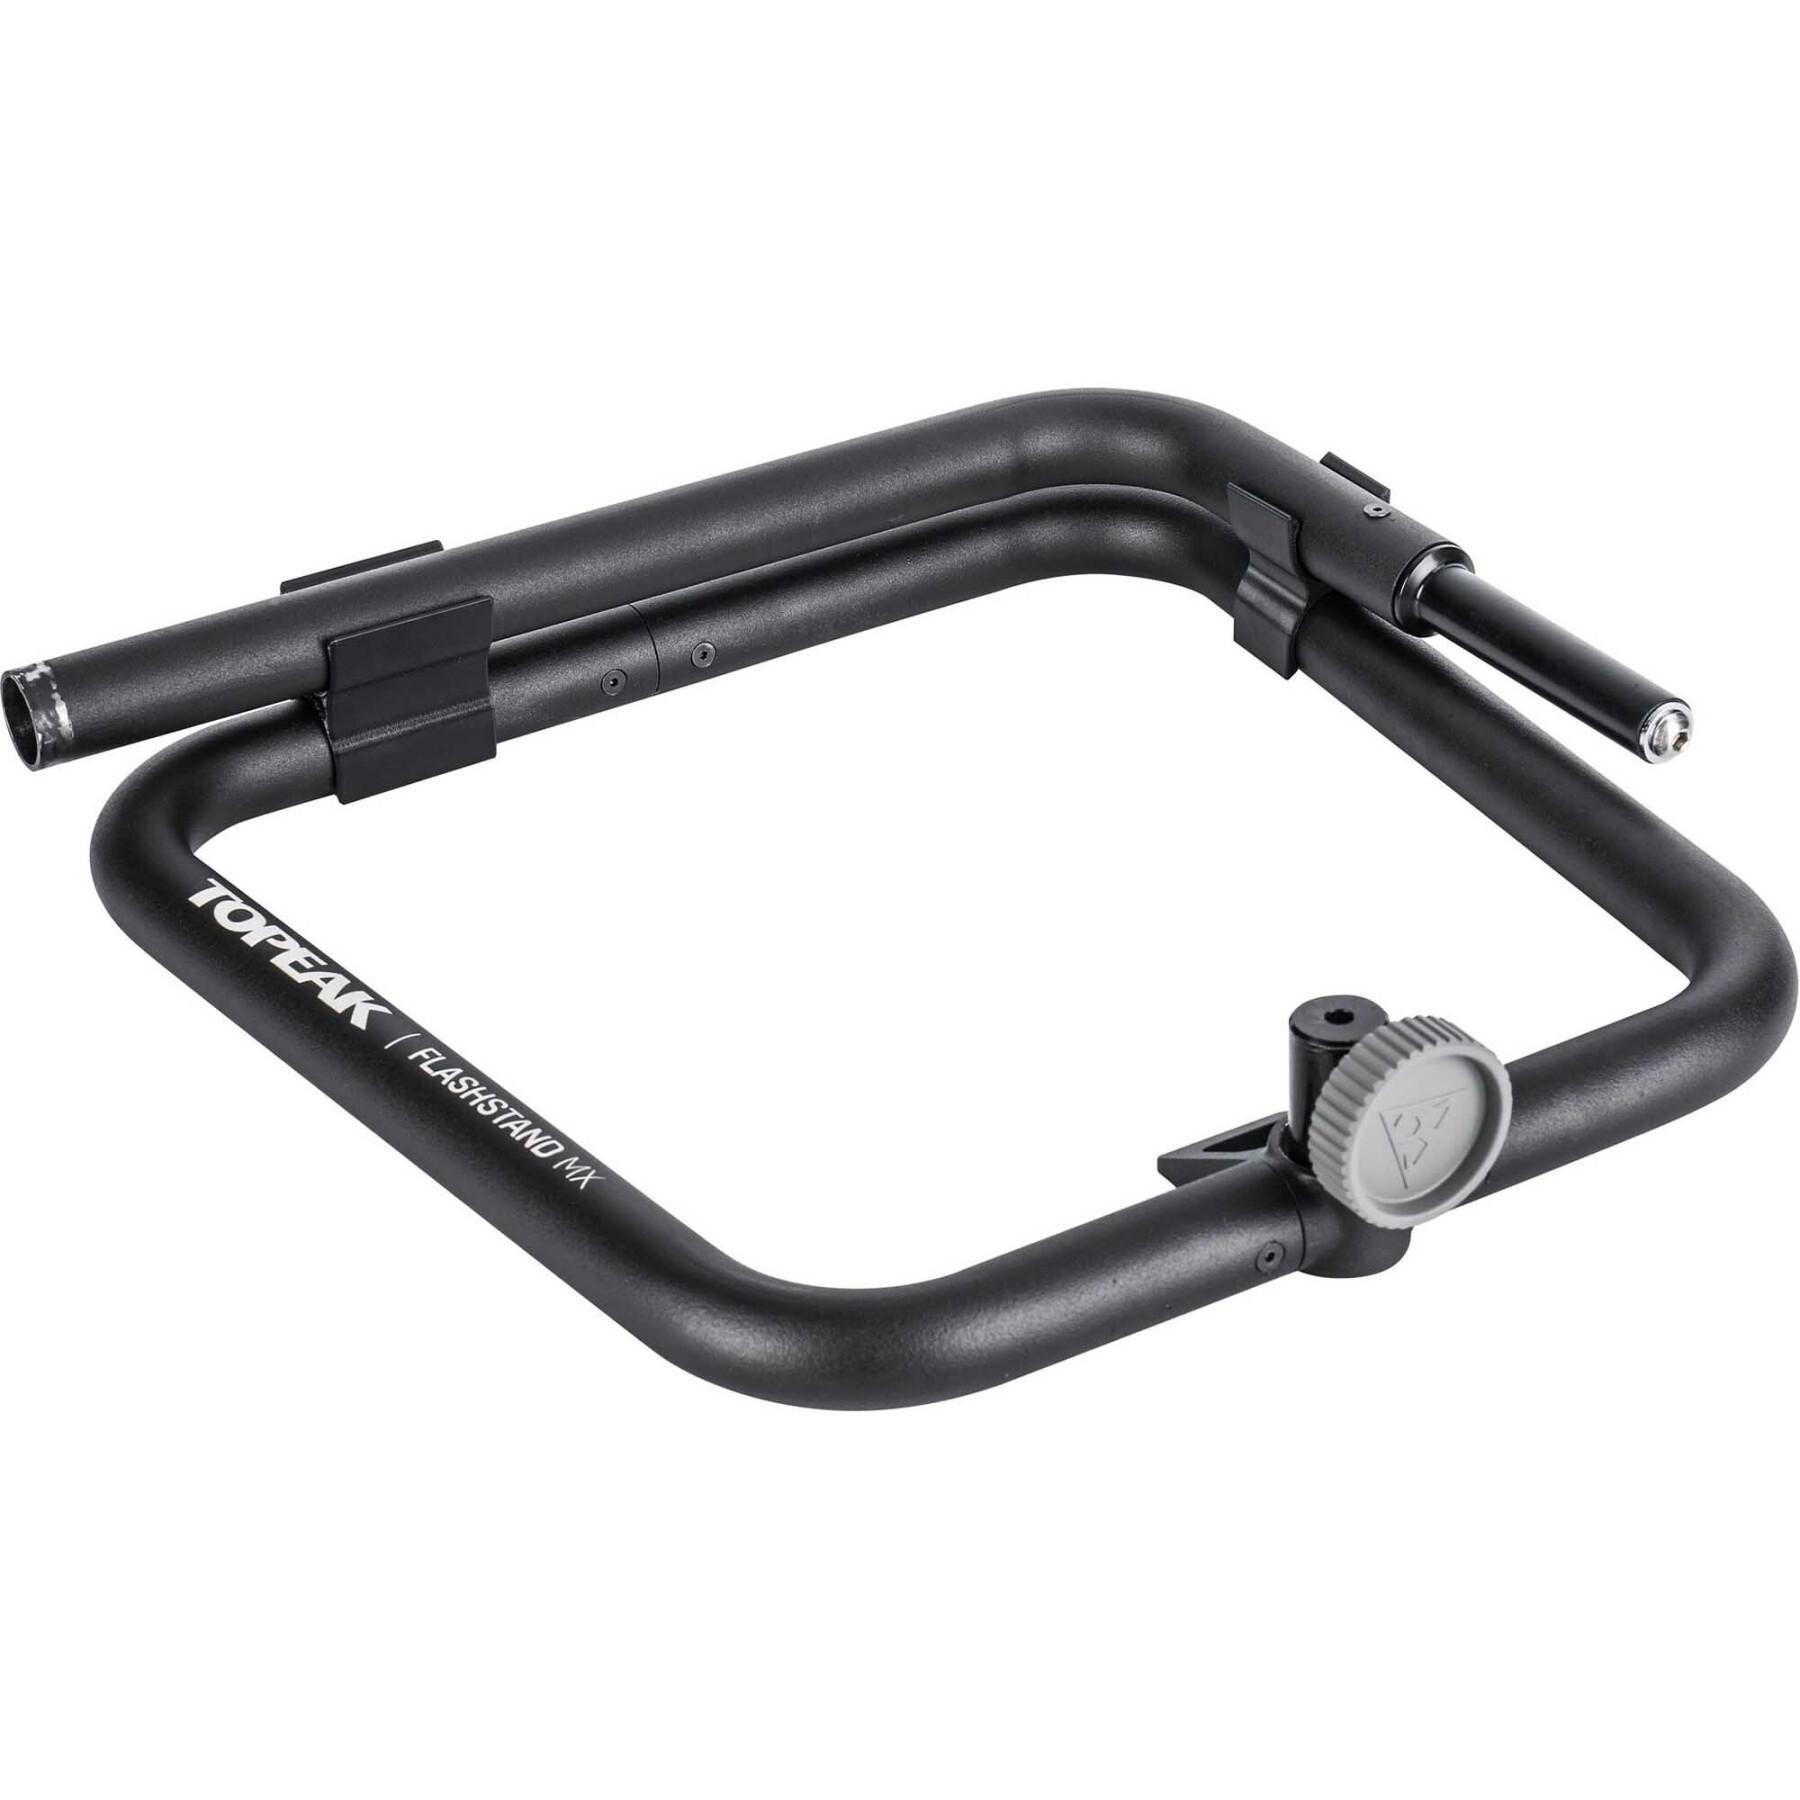 Support pour vélo Topeak Flash Stand MX